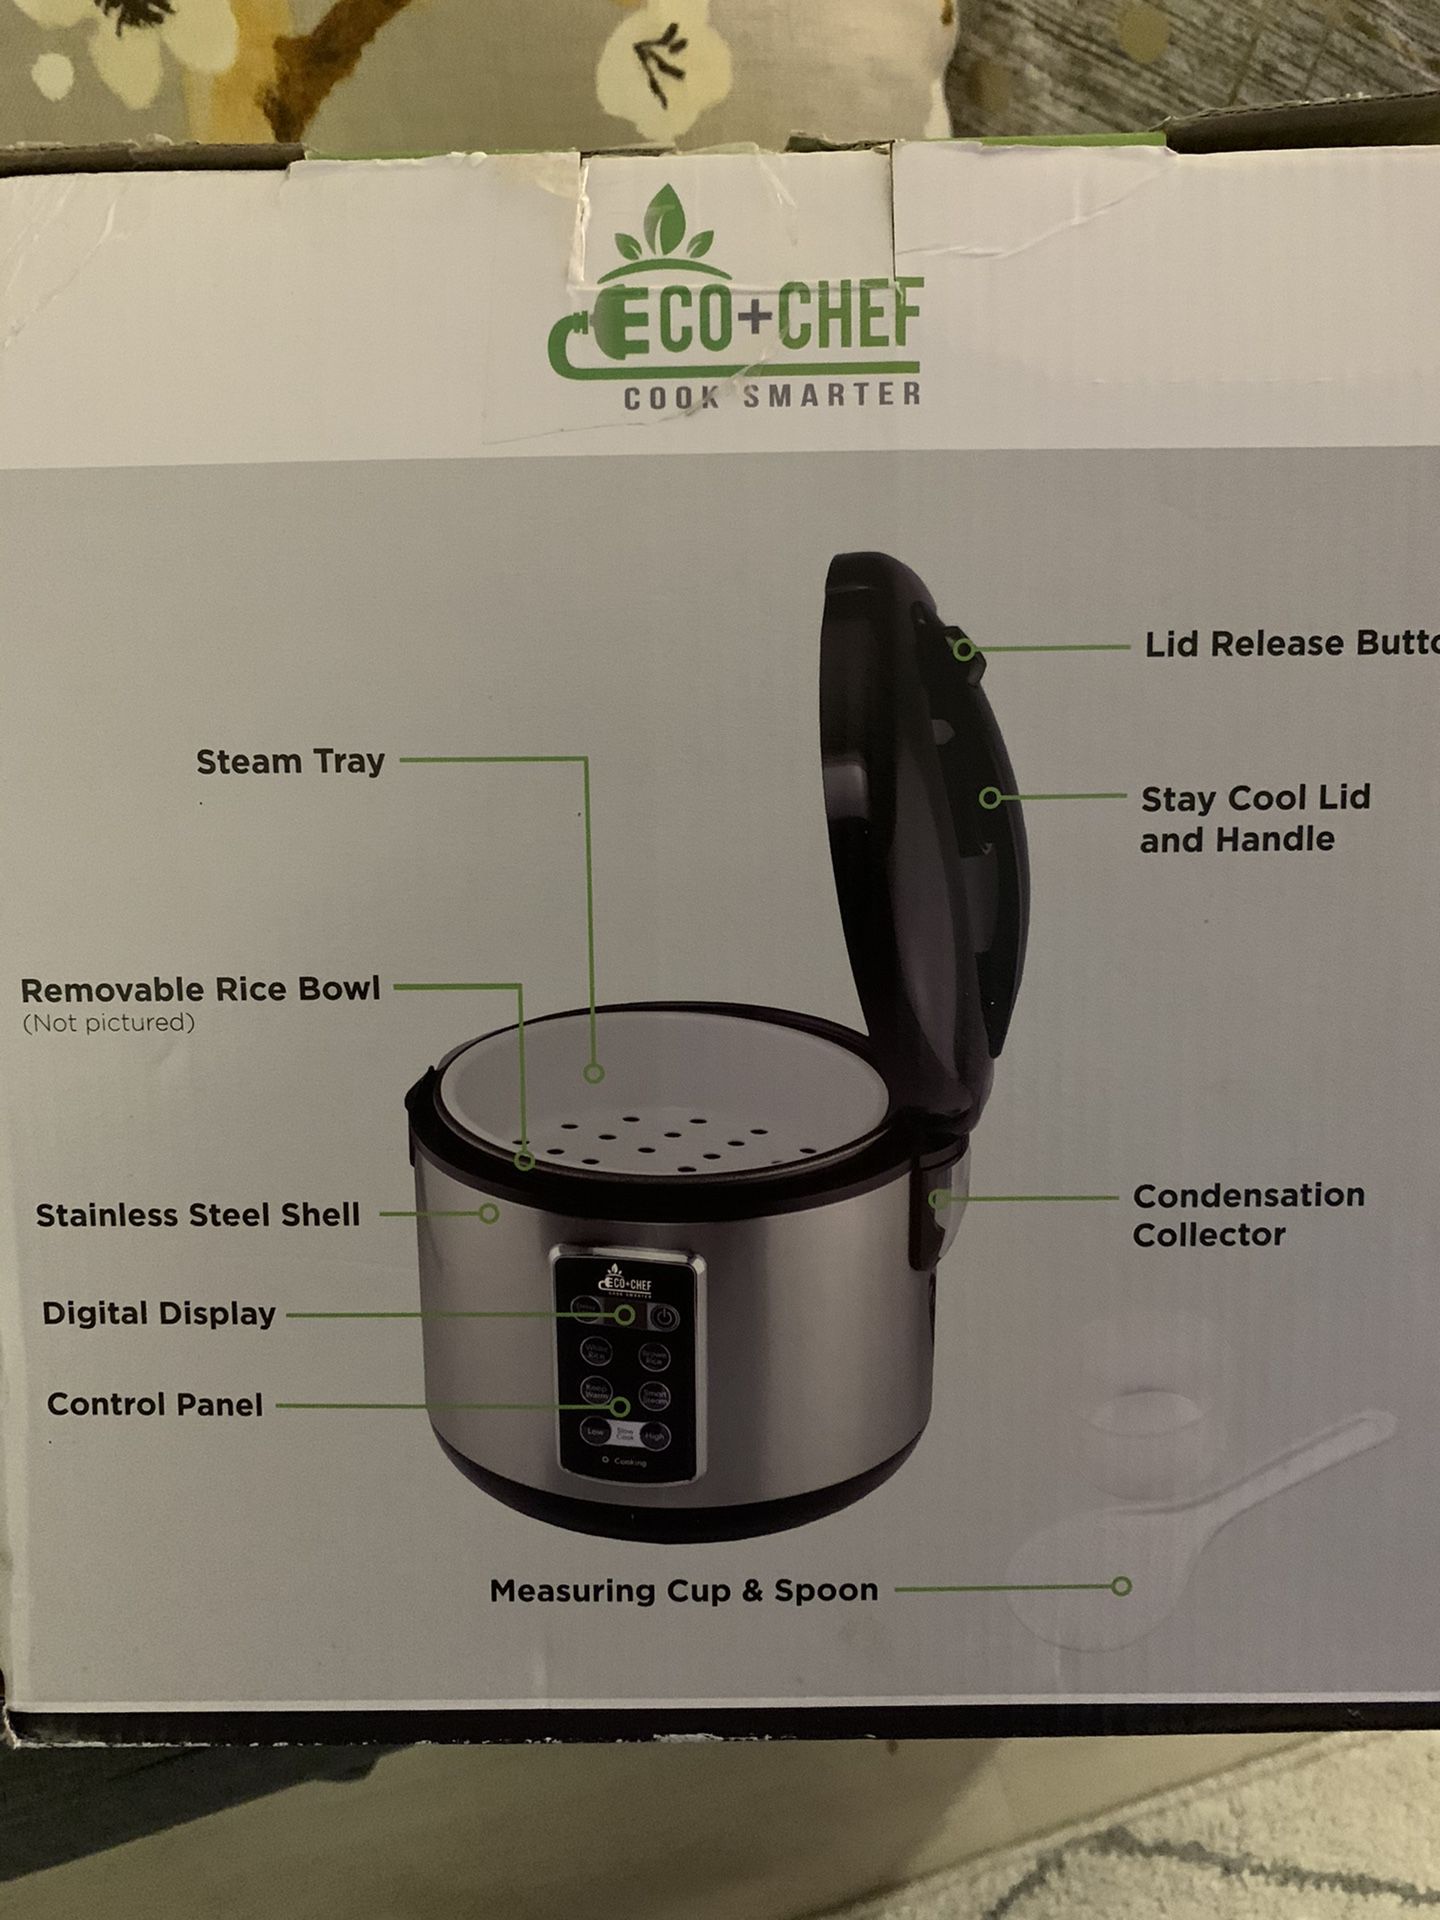 Oster Digital Rice Cooker for Sale in Campbell, CA - OfferUp